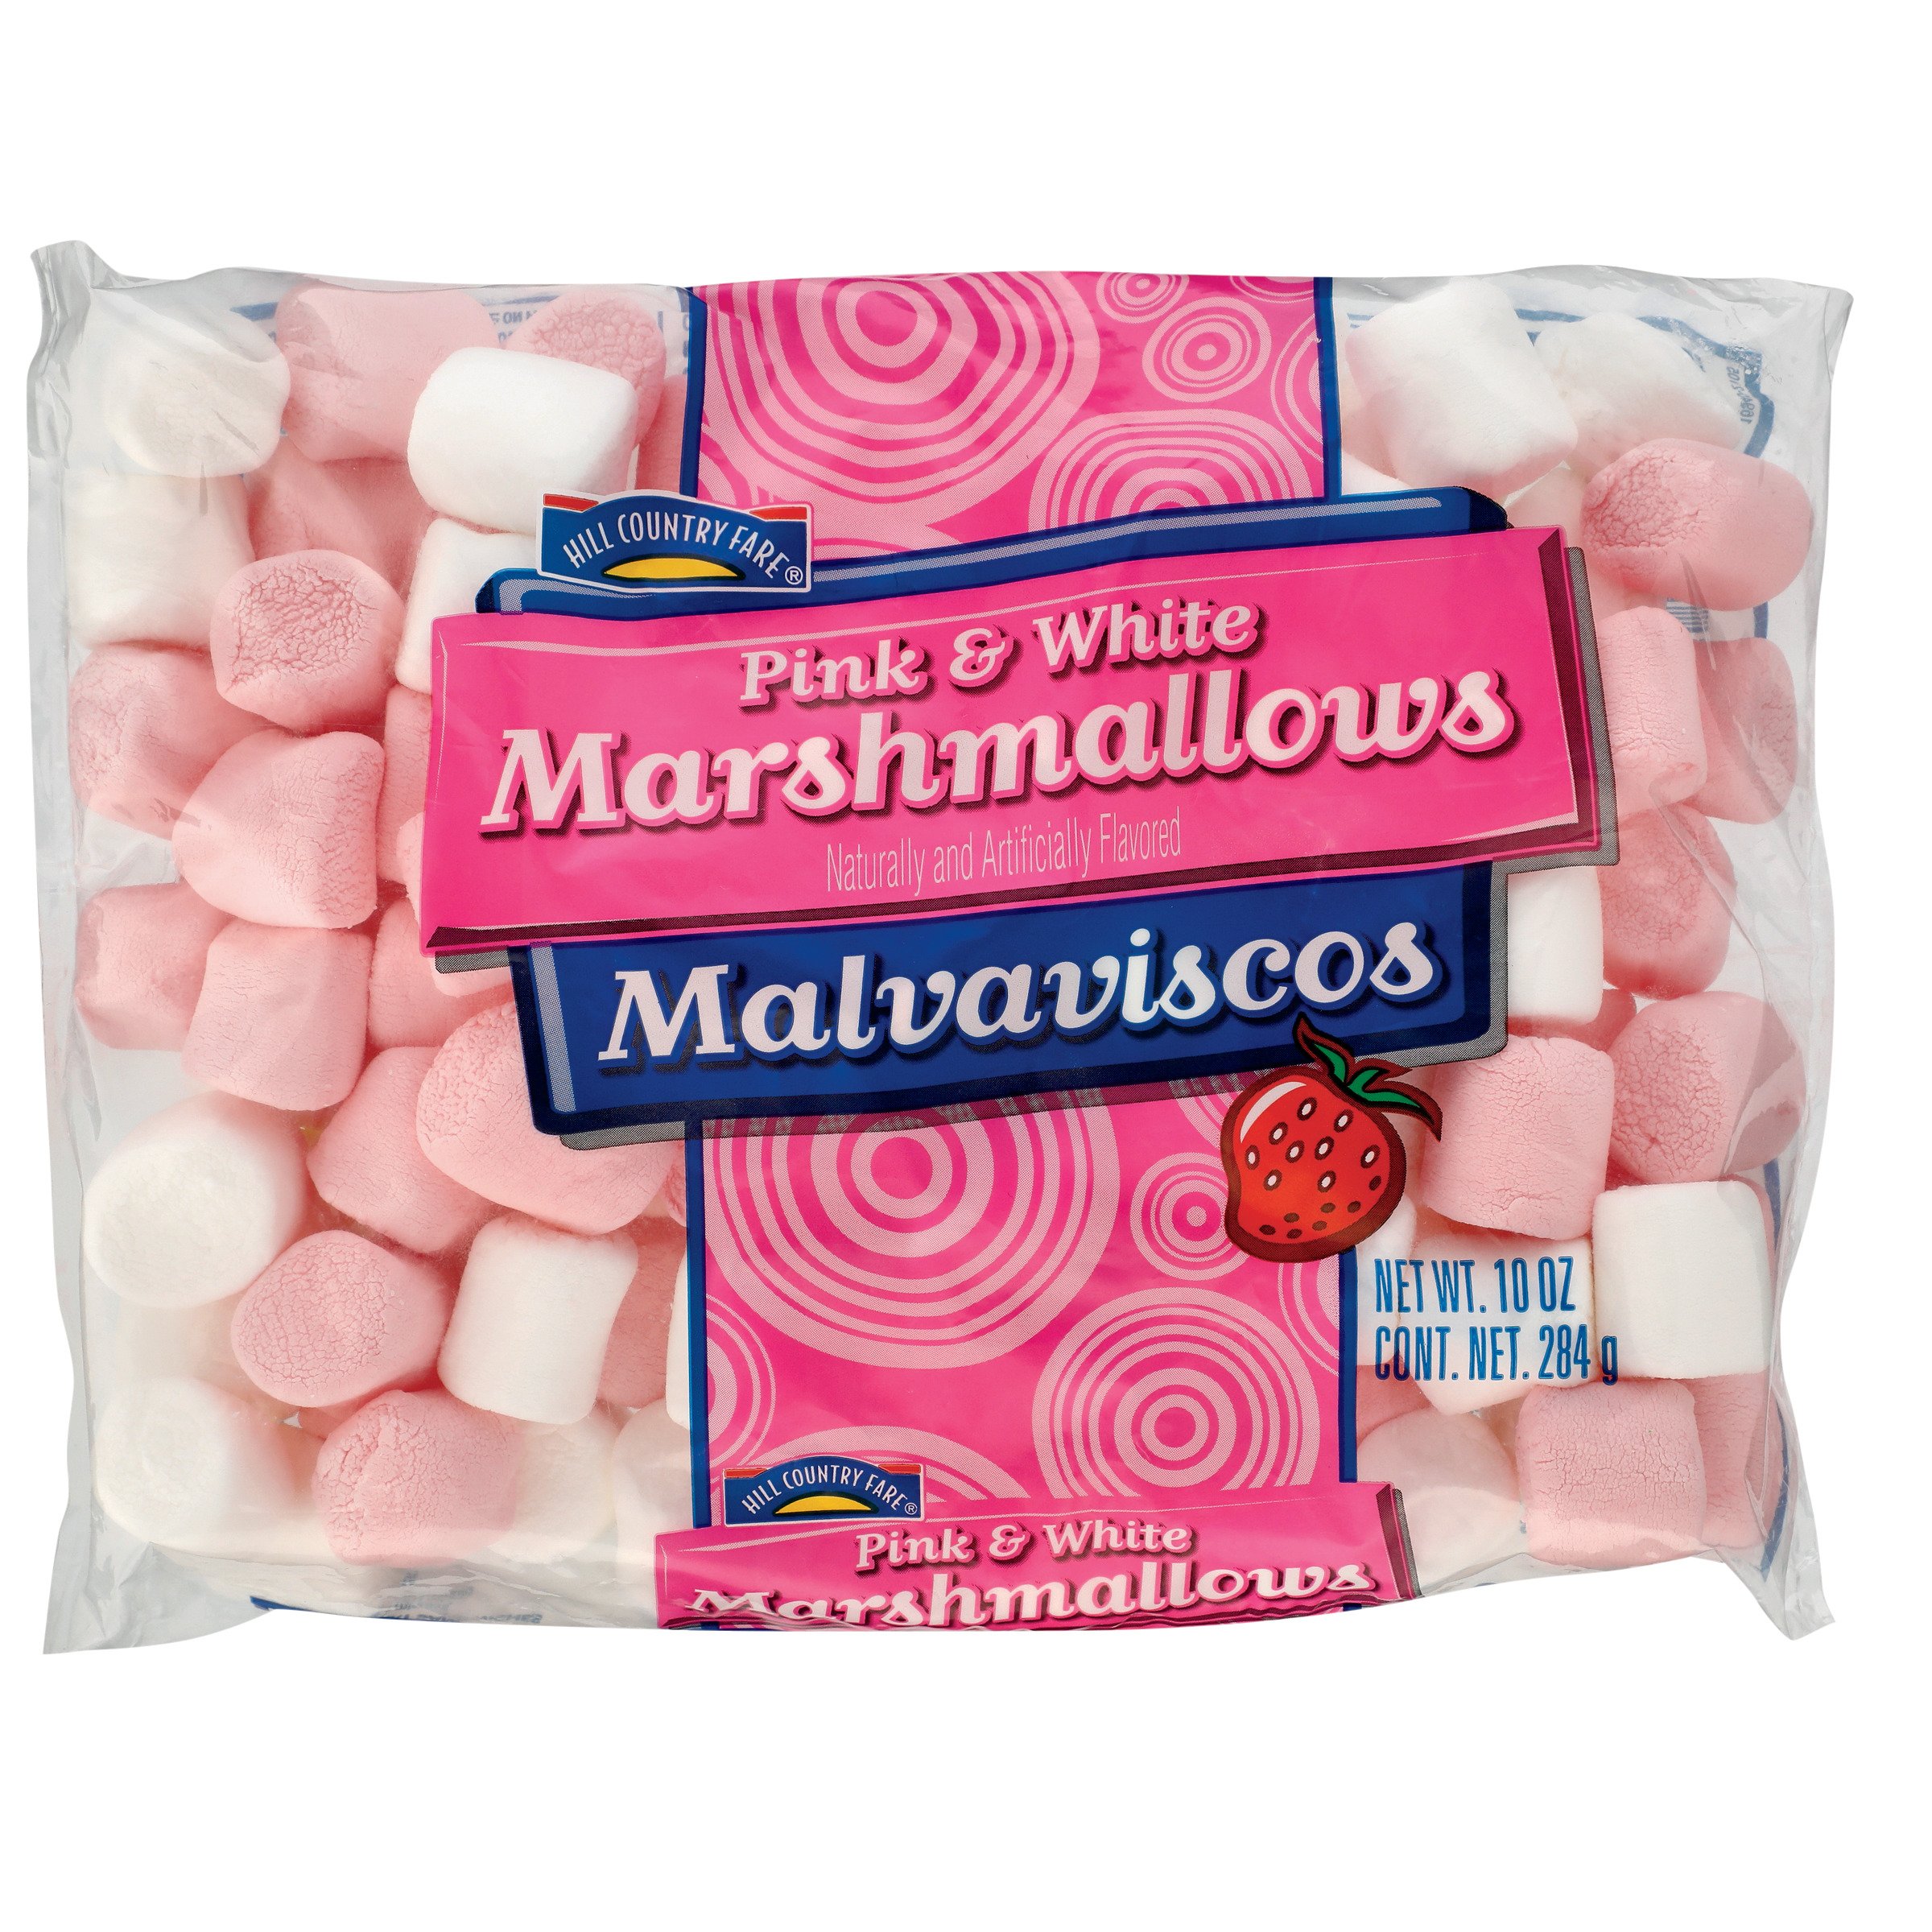 Hill Country Fare Pink and White Marshmallows